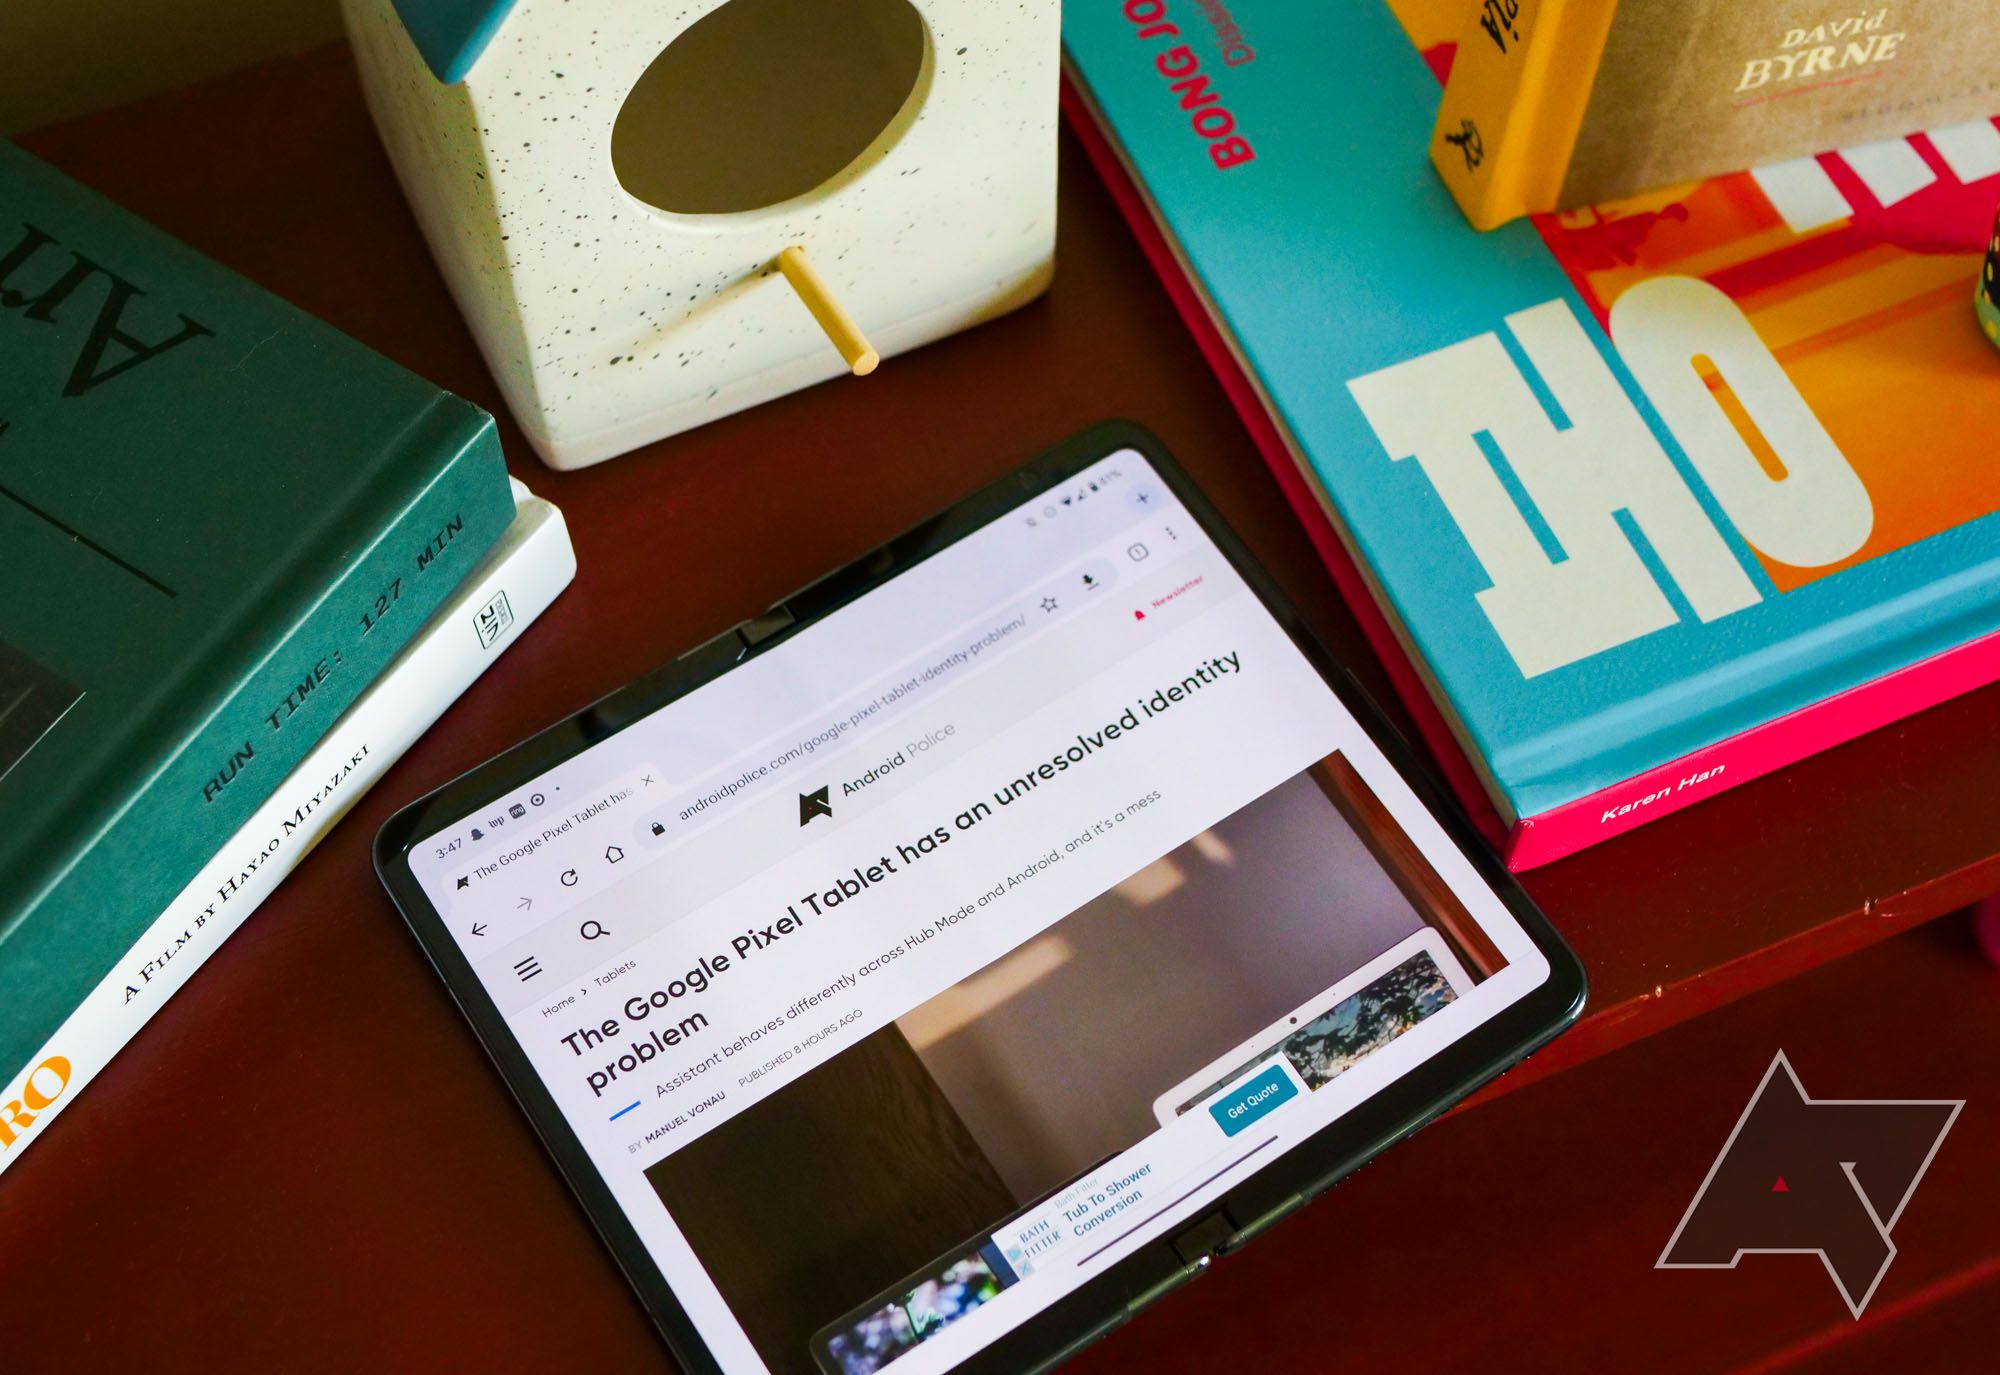 A foldable phone sits on a wooden desk, surrounded by various books.